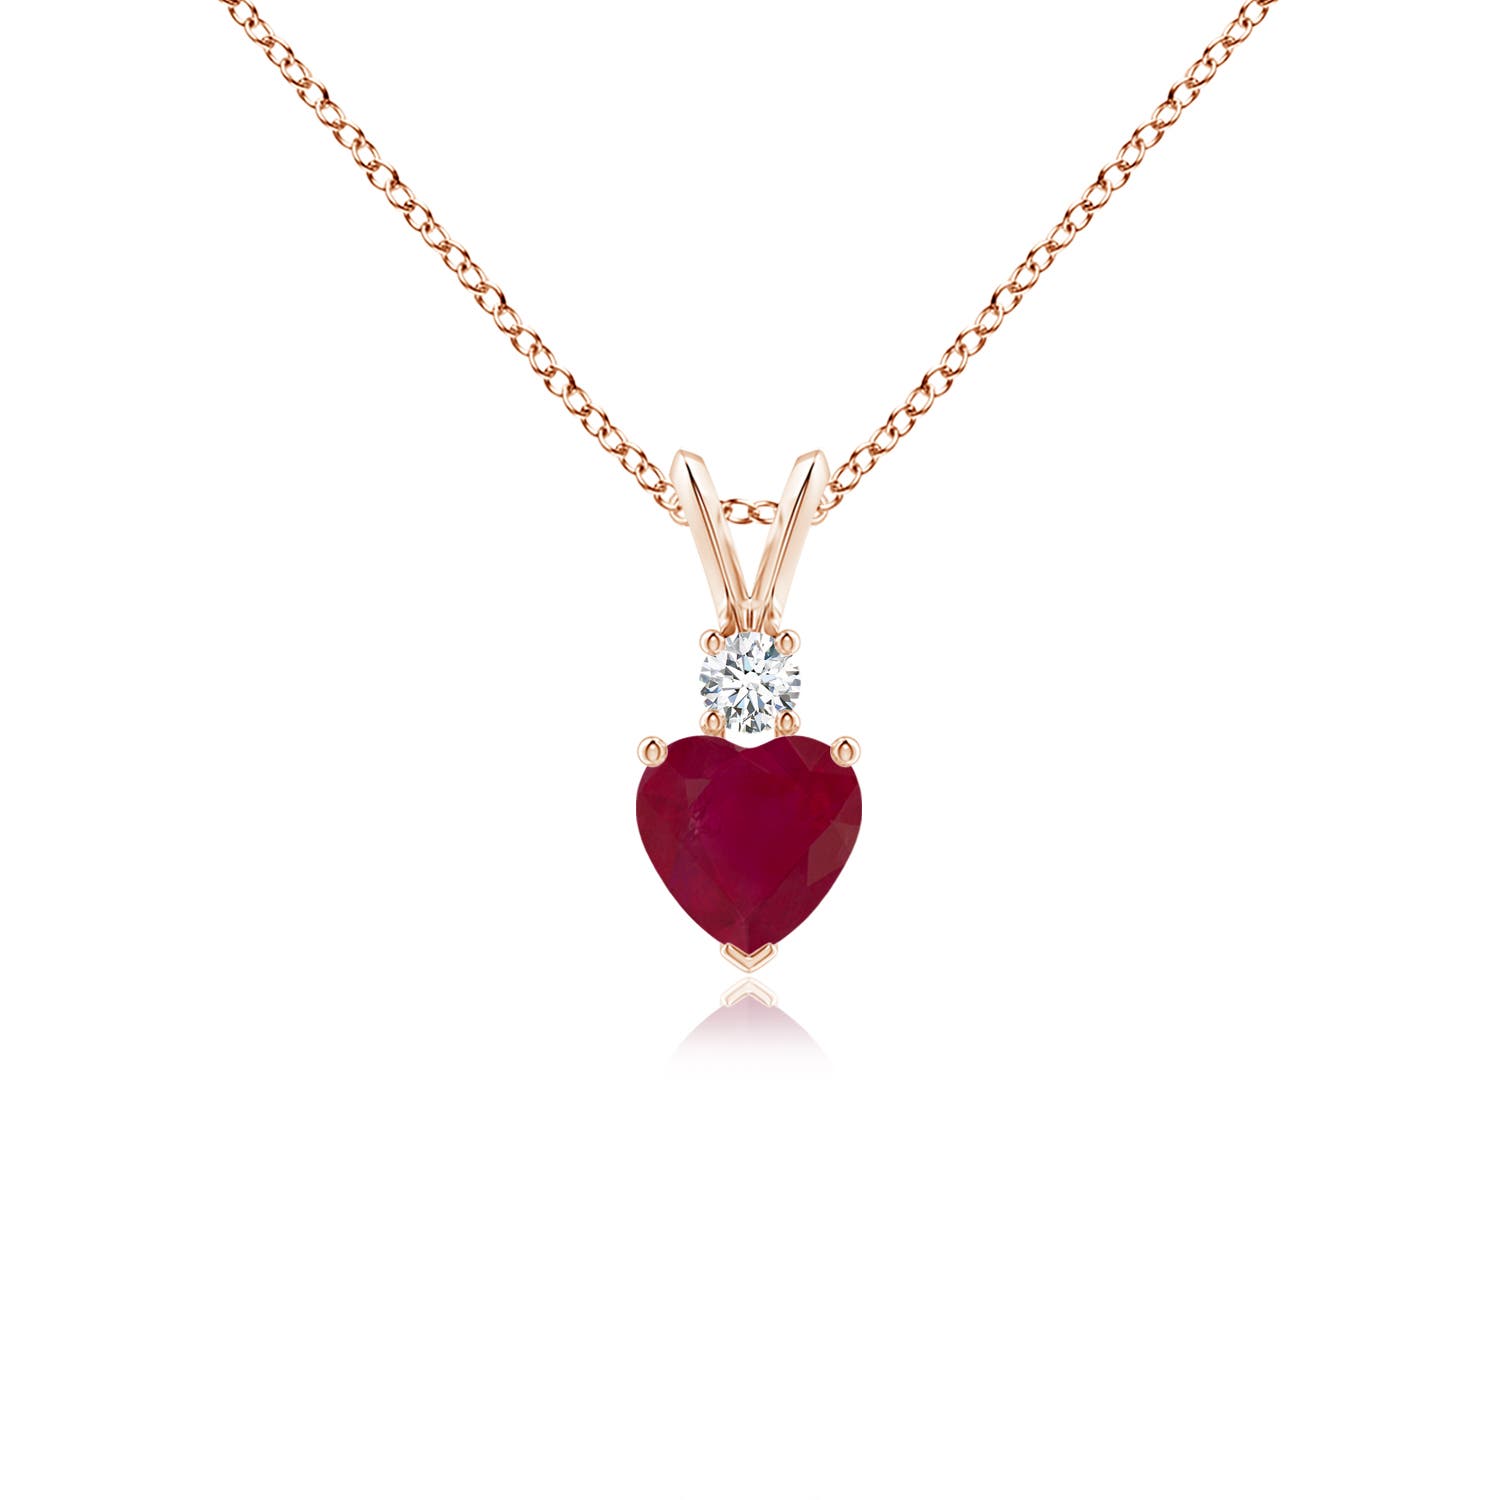 A - Ruby / 0.59 CT / 14 KT Rose Gold